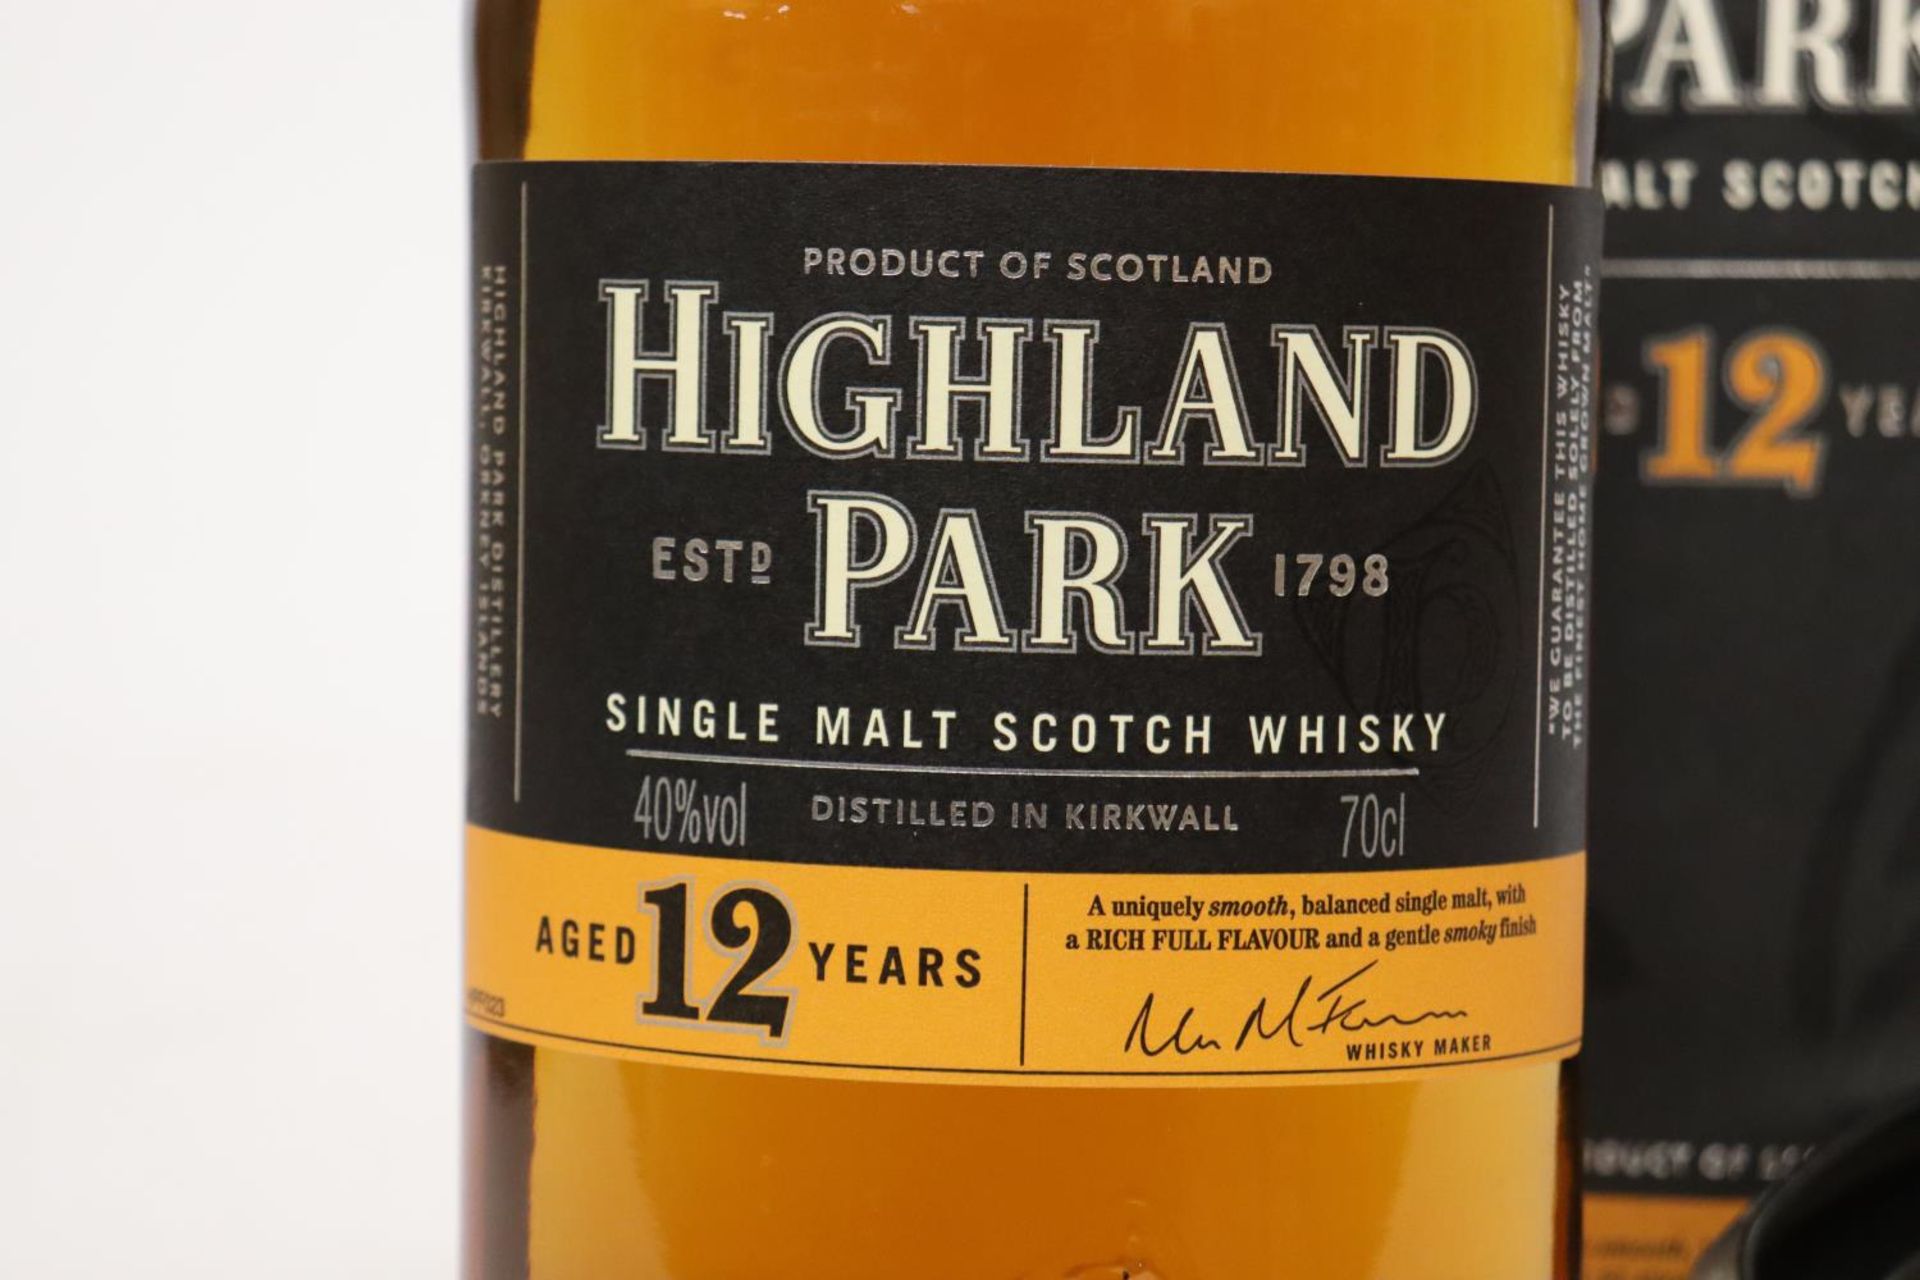 A BOTTLE OF HIGHLAND PARK 12 YEAR OLD WHISKY, BOXED - Image 4 of 5